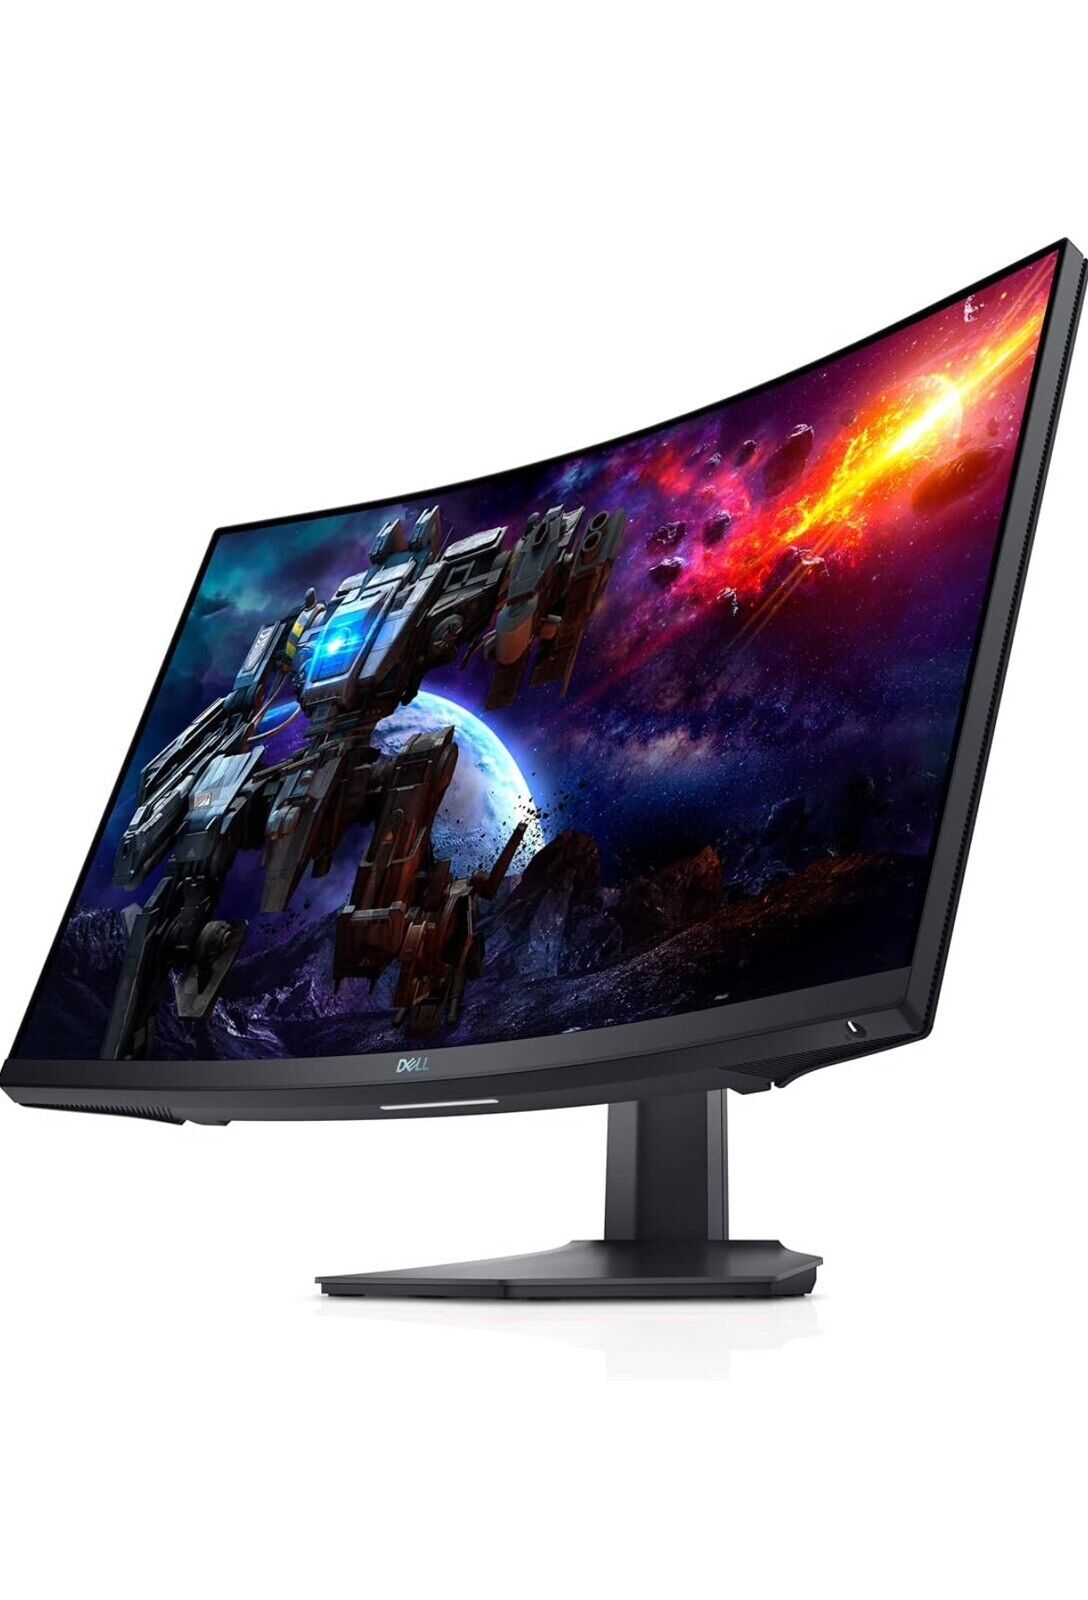 Dell Curved Gaming Monitor 27” Curved with 165Hz Refresh Rate, QHD (2560 x 1440)